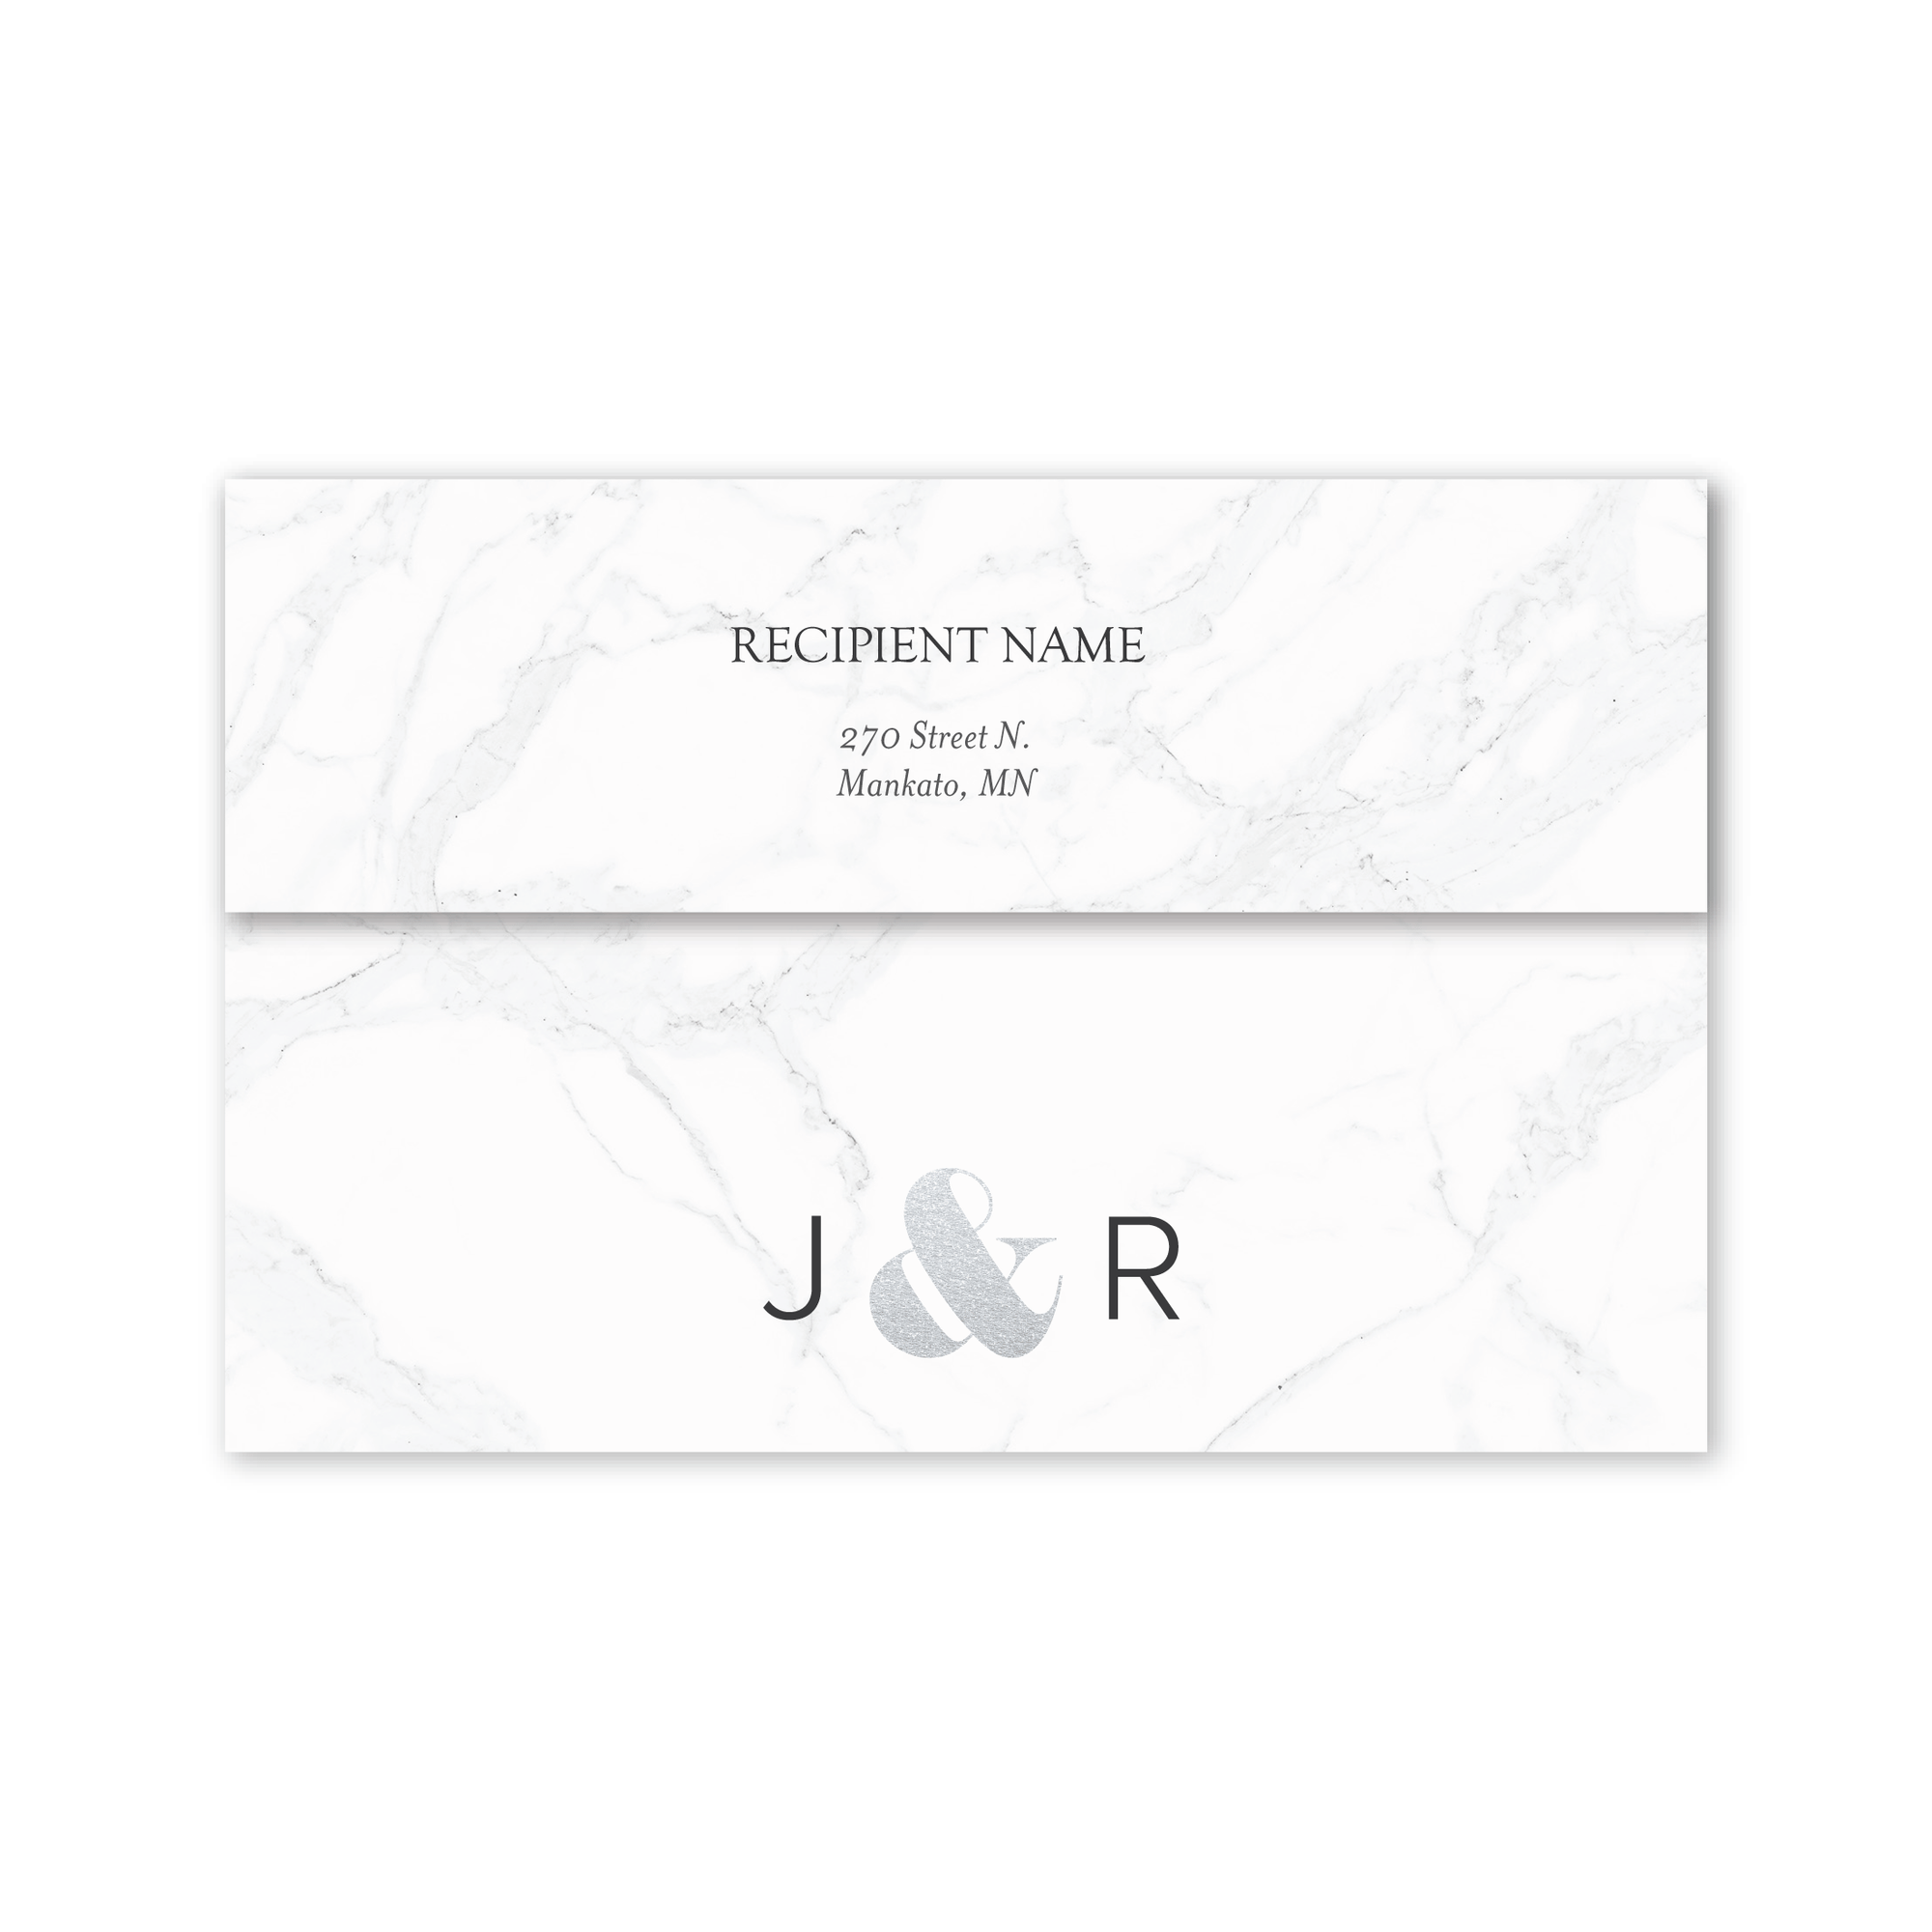 Classic Marble All-in-One Wedding Invitation Gartner Studios All-in-One Wedding Invitation 98525